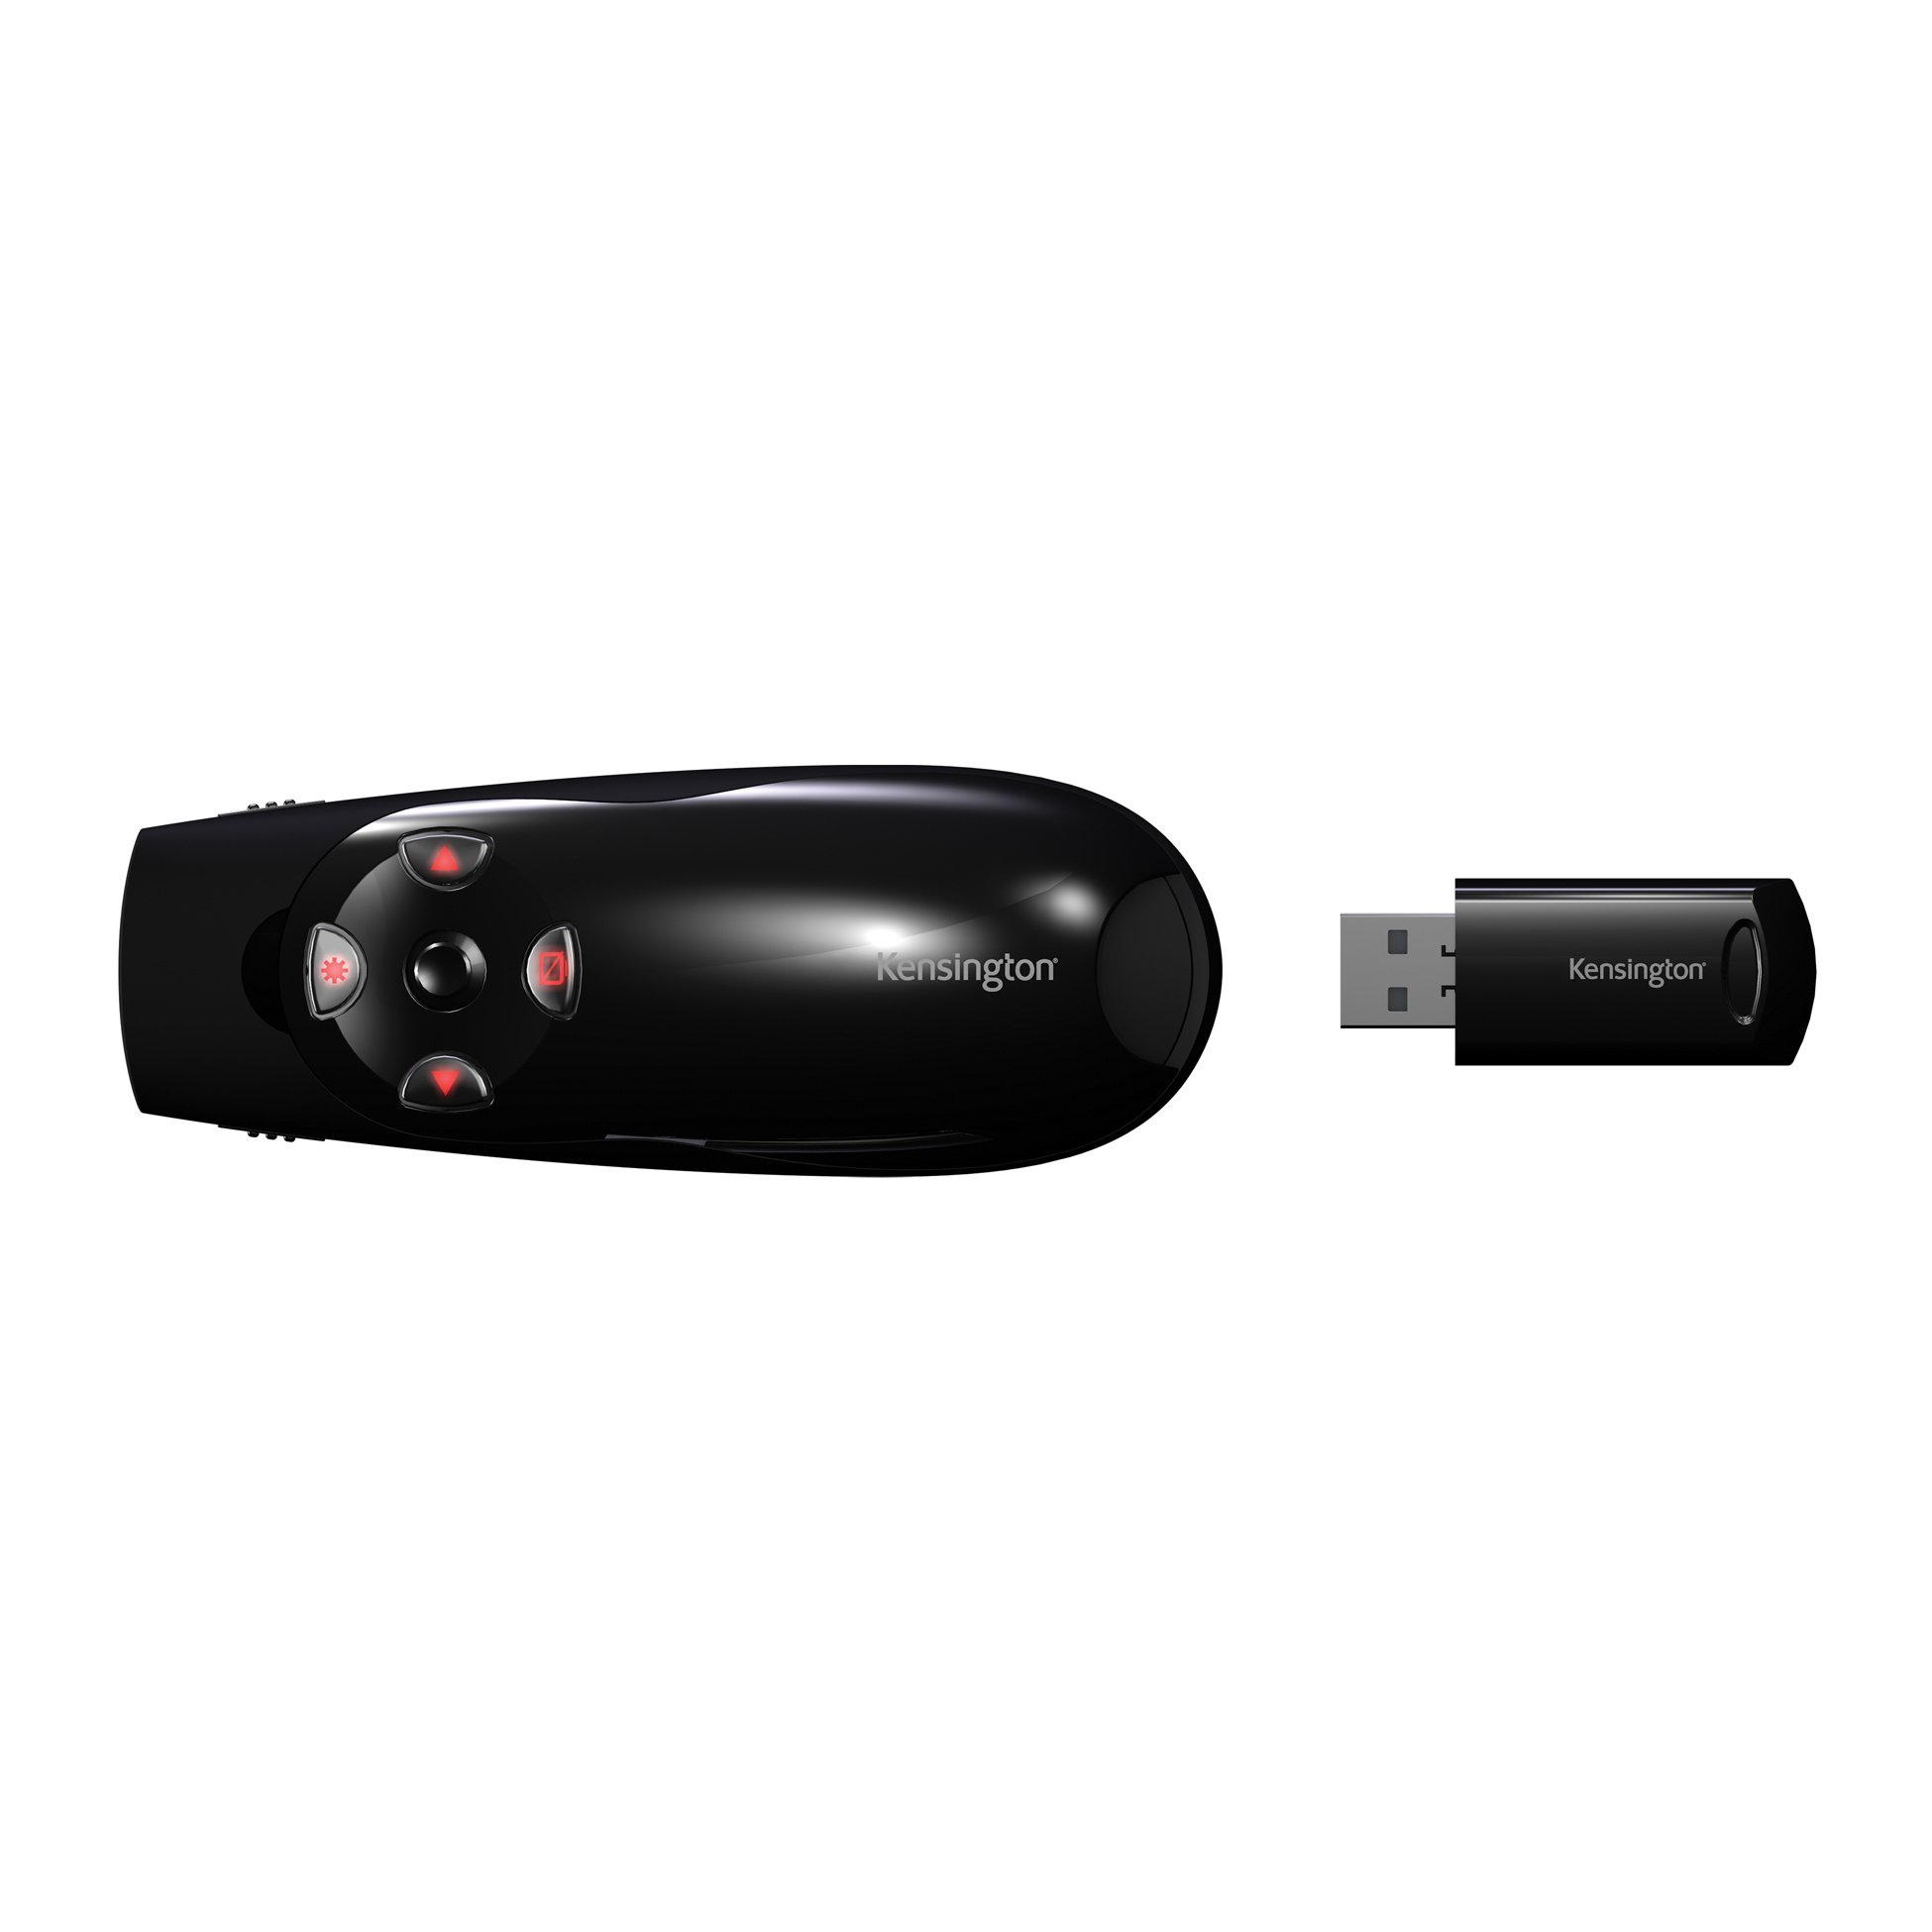 Kensington Expert Wireless Presenter with Red Laser Pointer and Cursor Control (K72425AM)